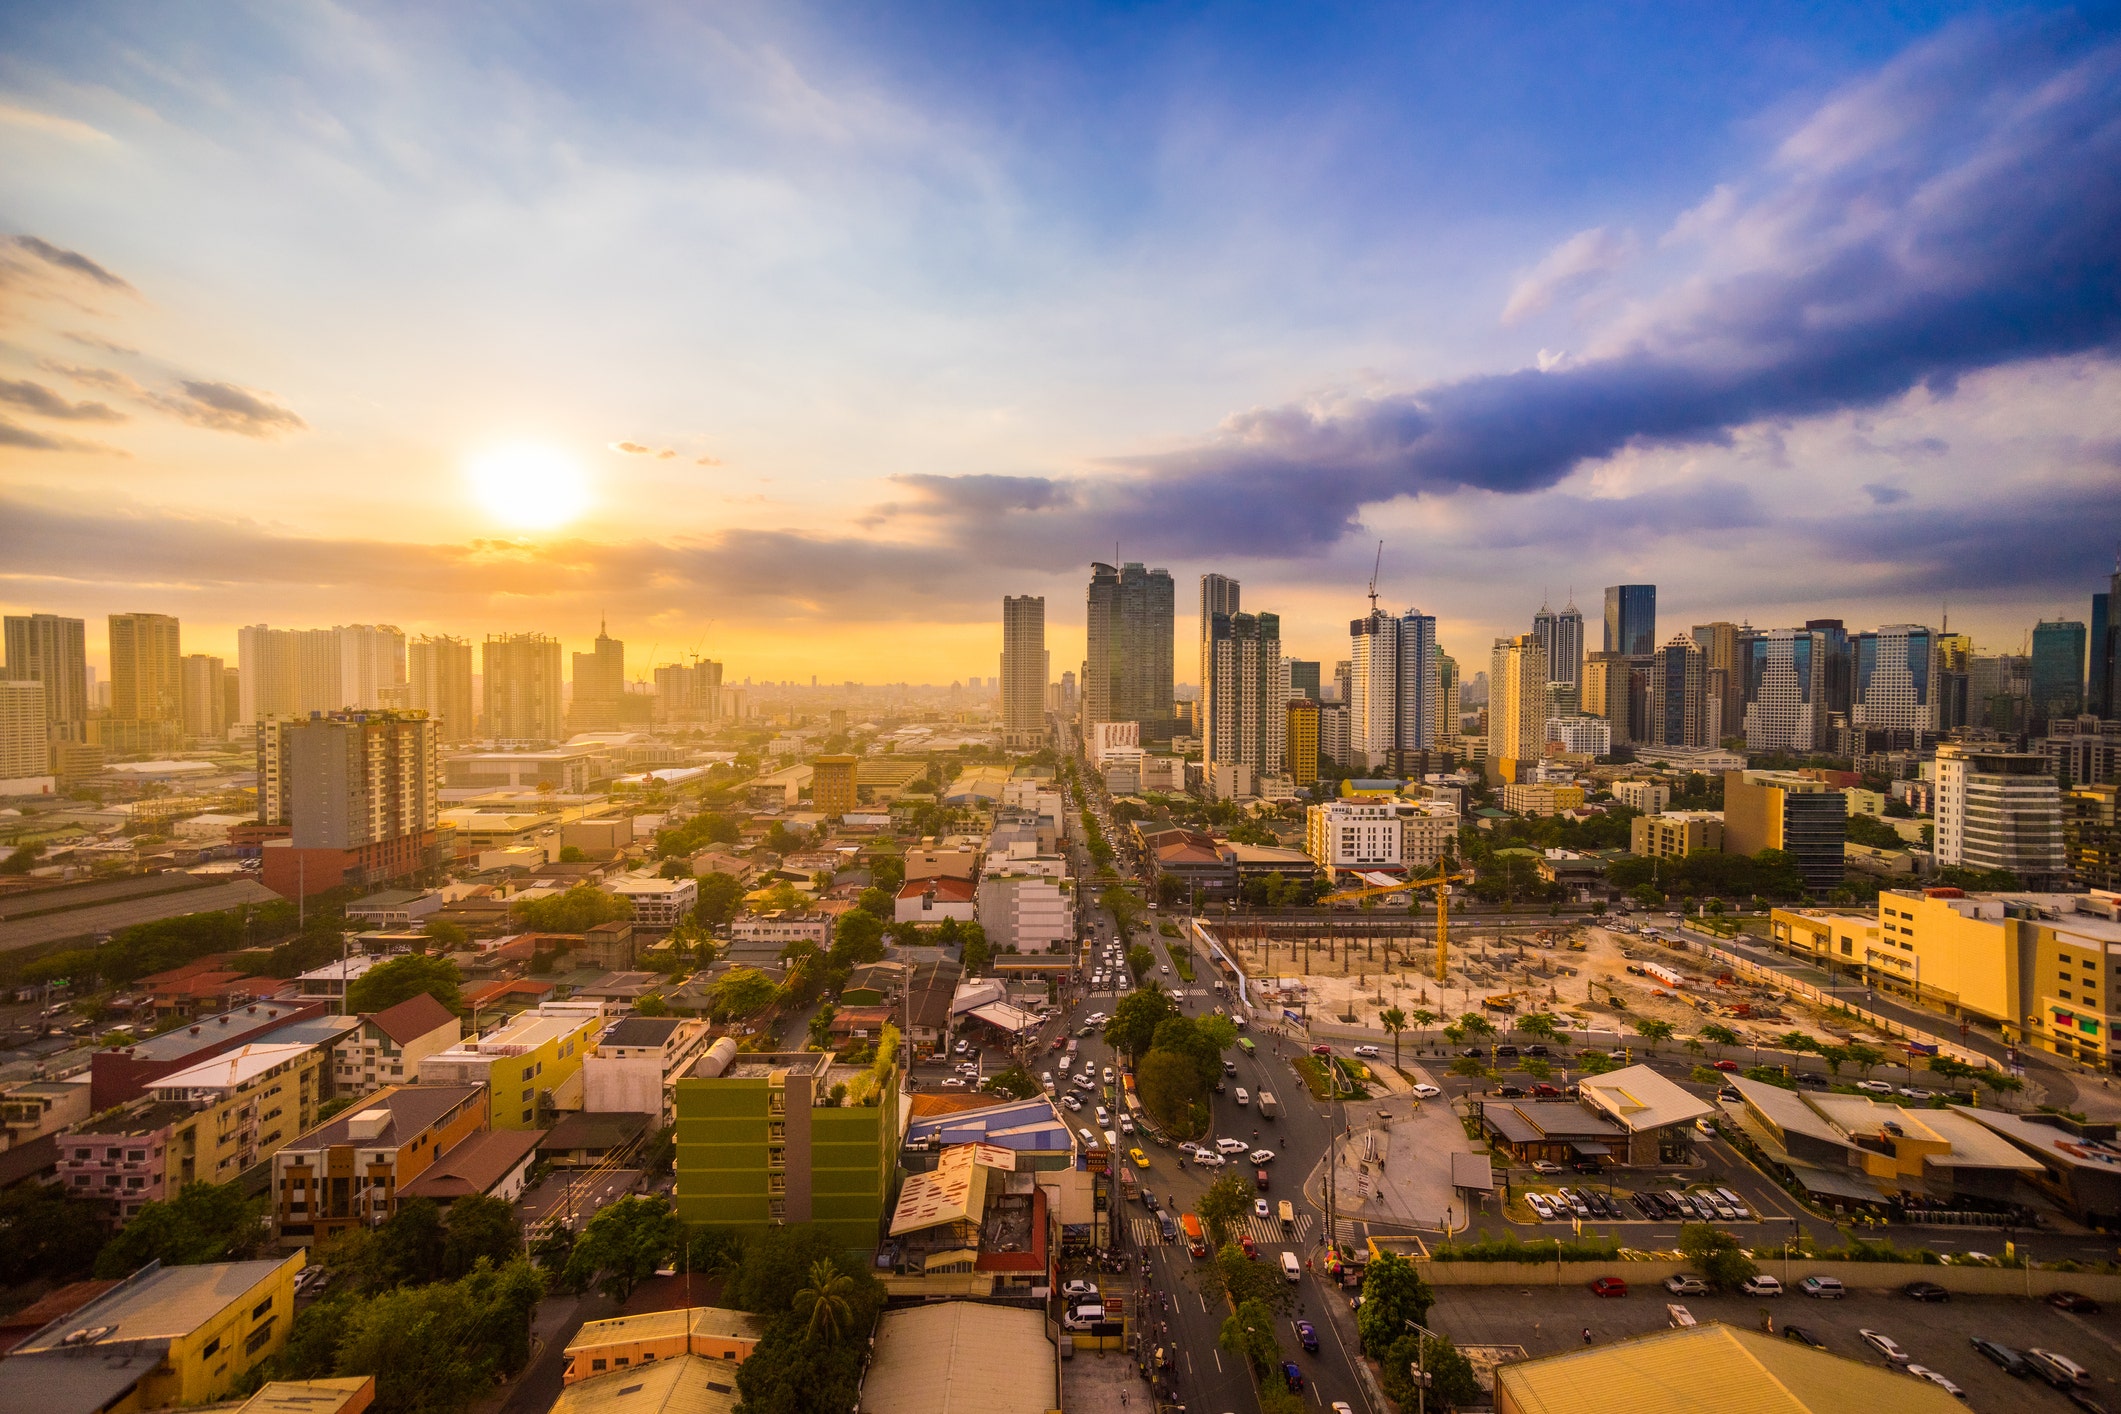 Asia-Pacific's Emerging Innovation Leaders: The Philippines